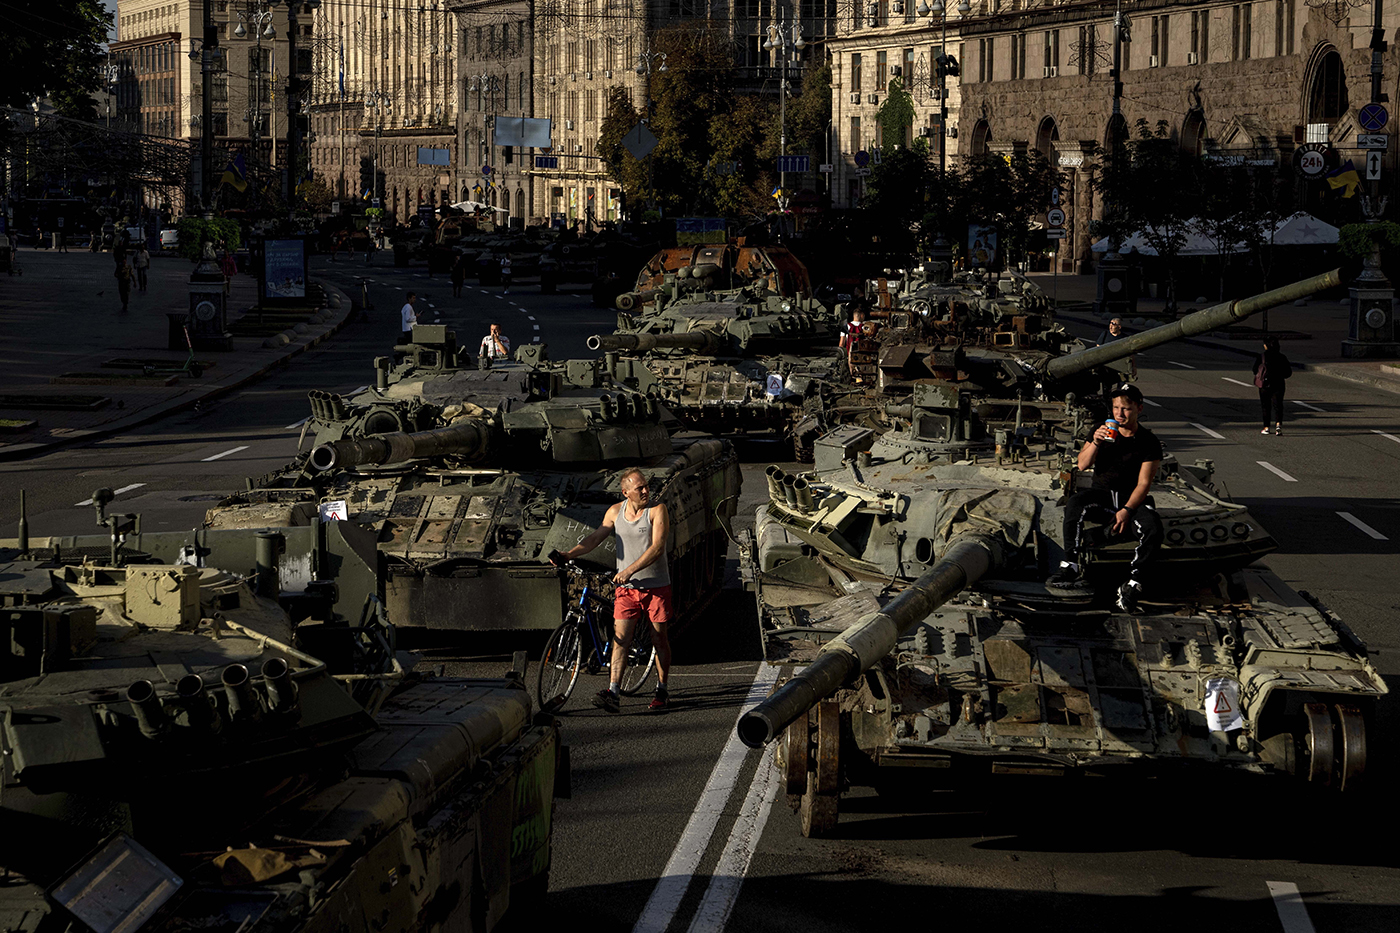 People walk among destroyed military vehicles on a city street